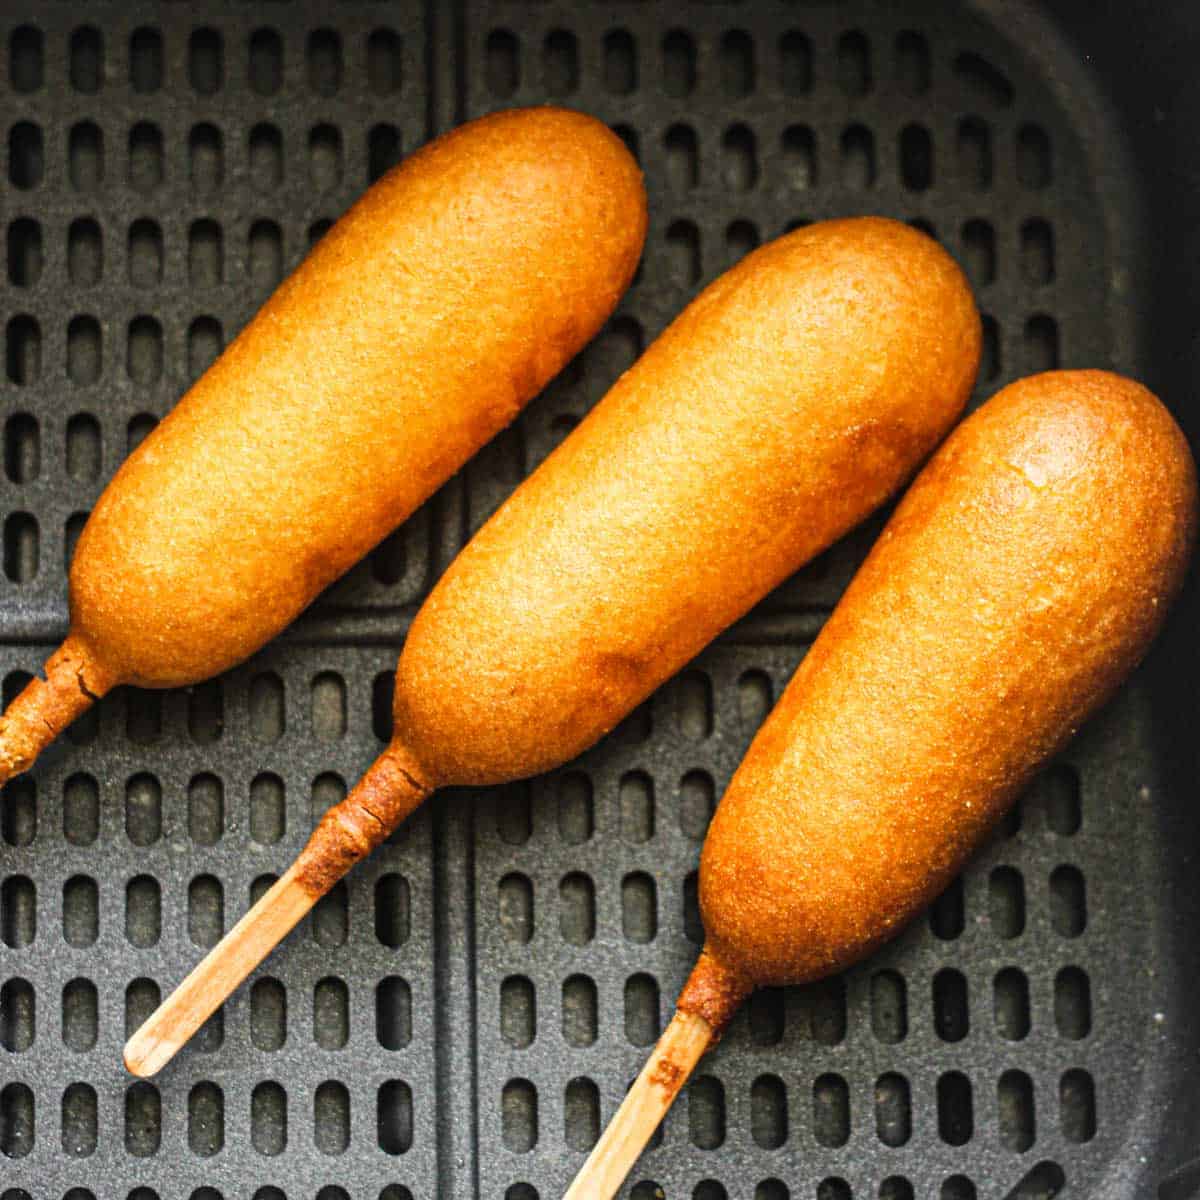 State Fair Corn Dogs in Air Fryer - The Top Meal